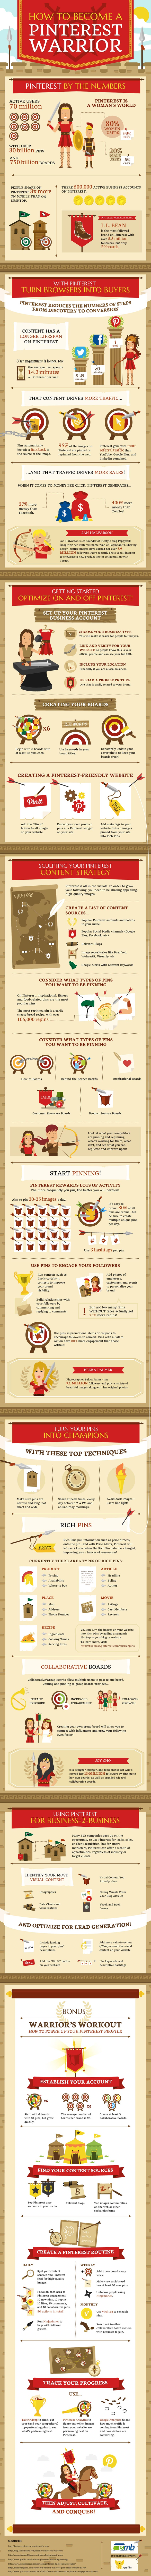 become a pinterest warrior infographic